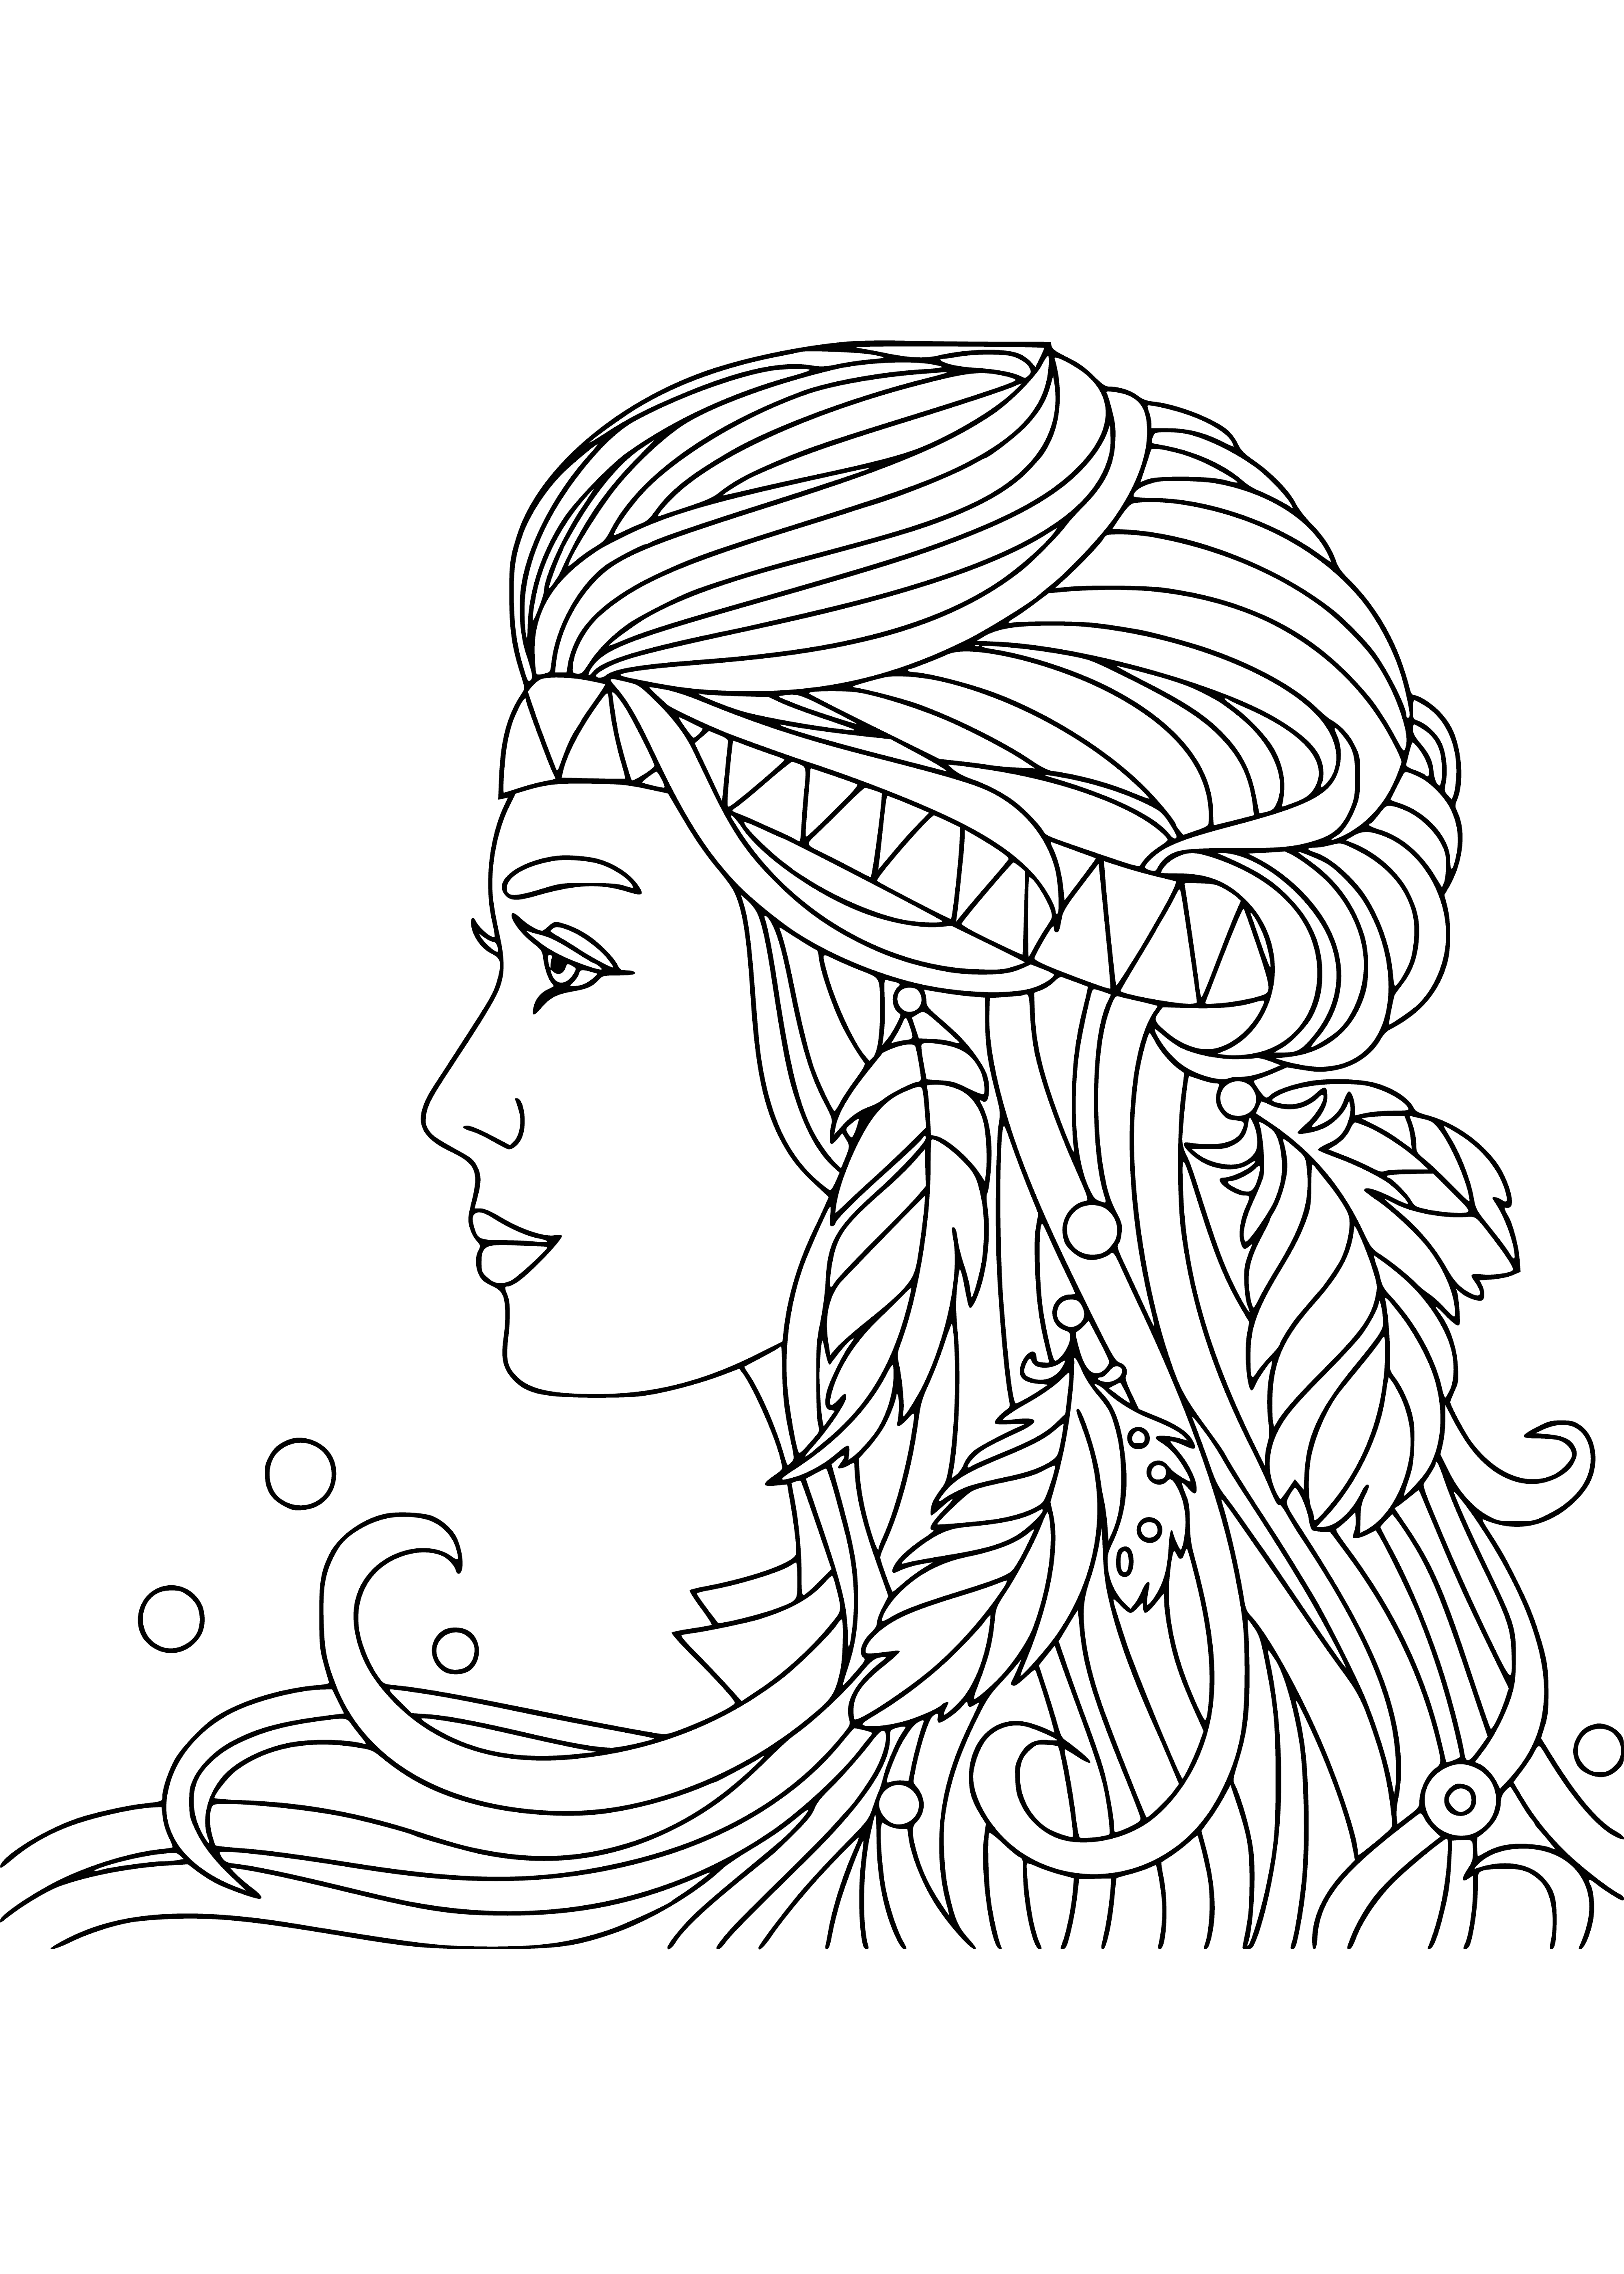 coloring page: Smiling woman enjoys a cup of coffee & coloring in her book, pencil in hand. A coloring page of peace & contentment.